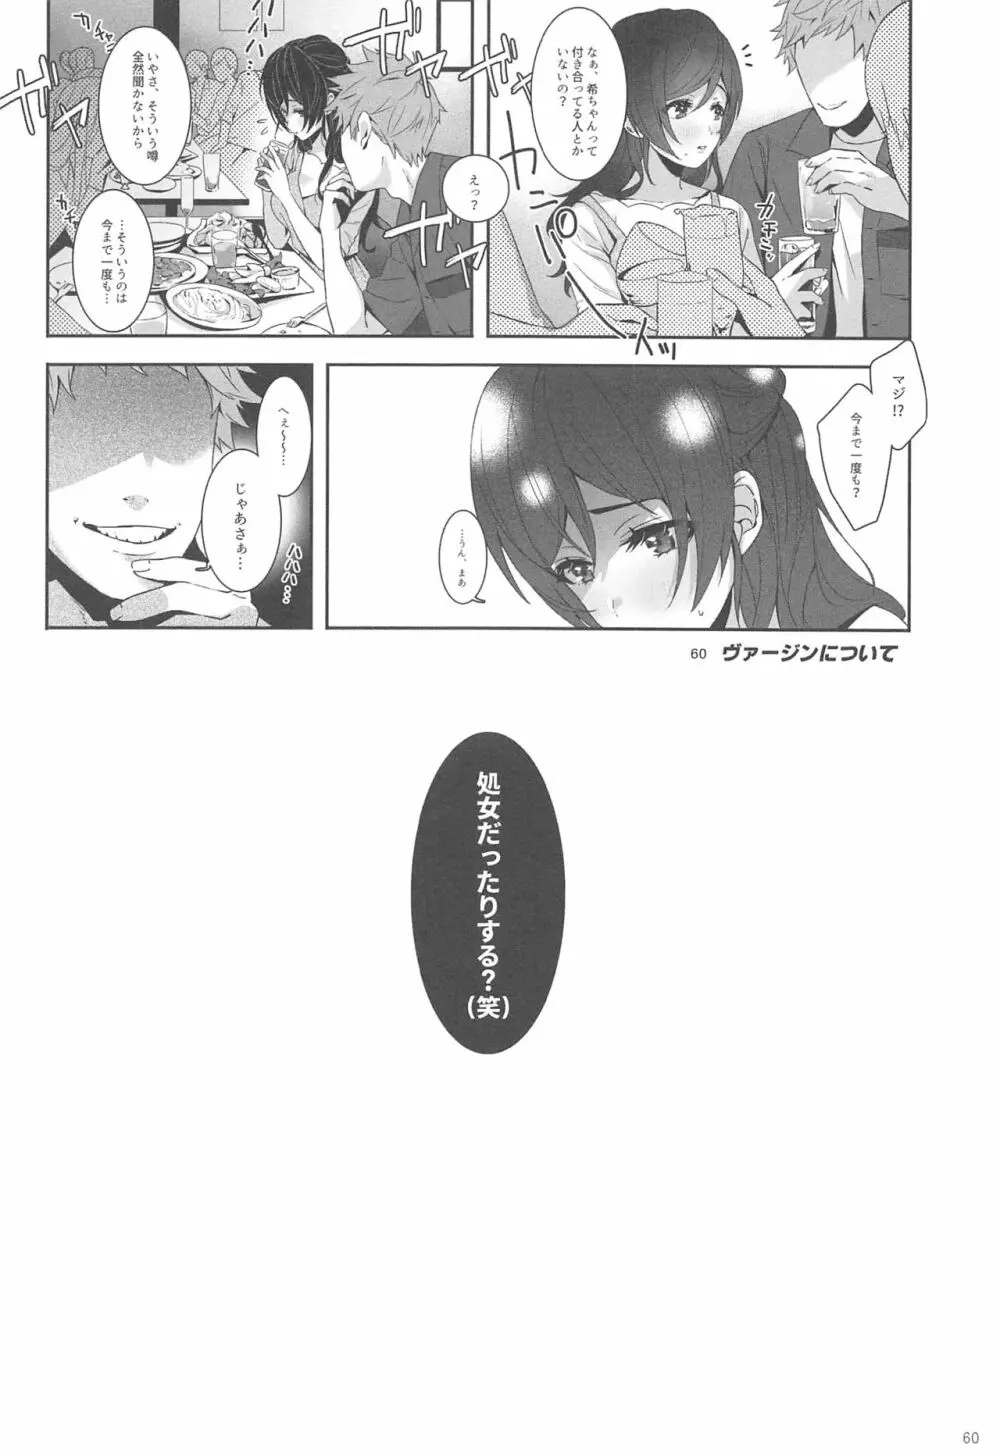 Re:デーデッデー!!!!!!!! - page61